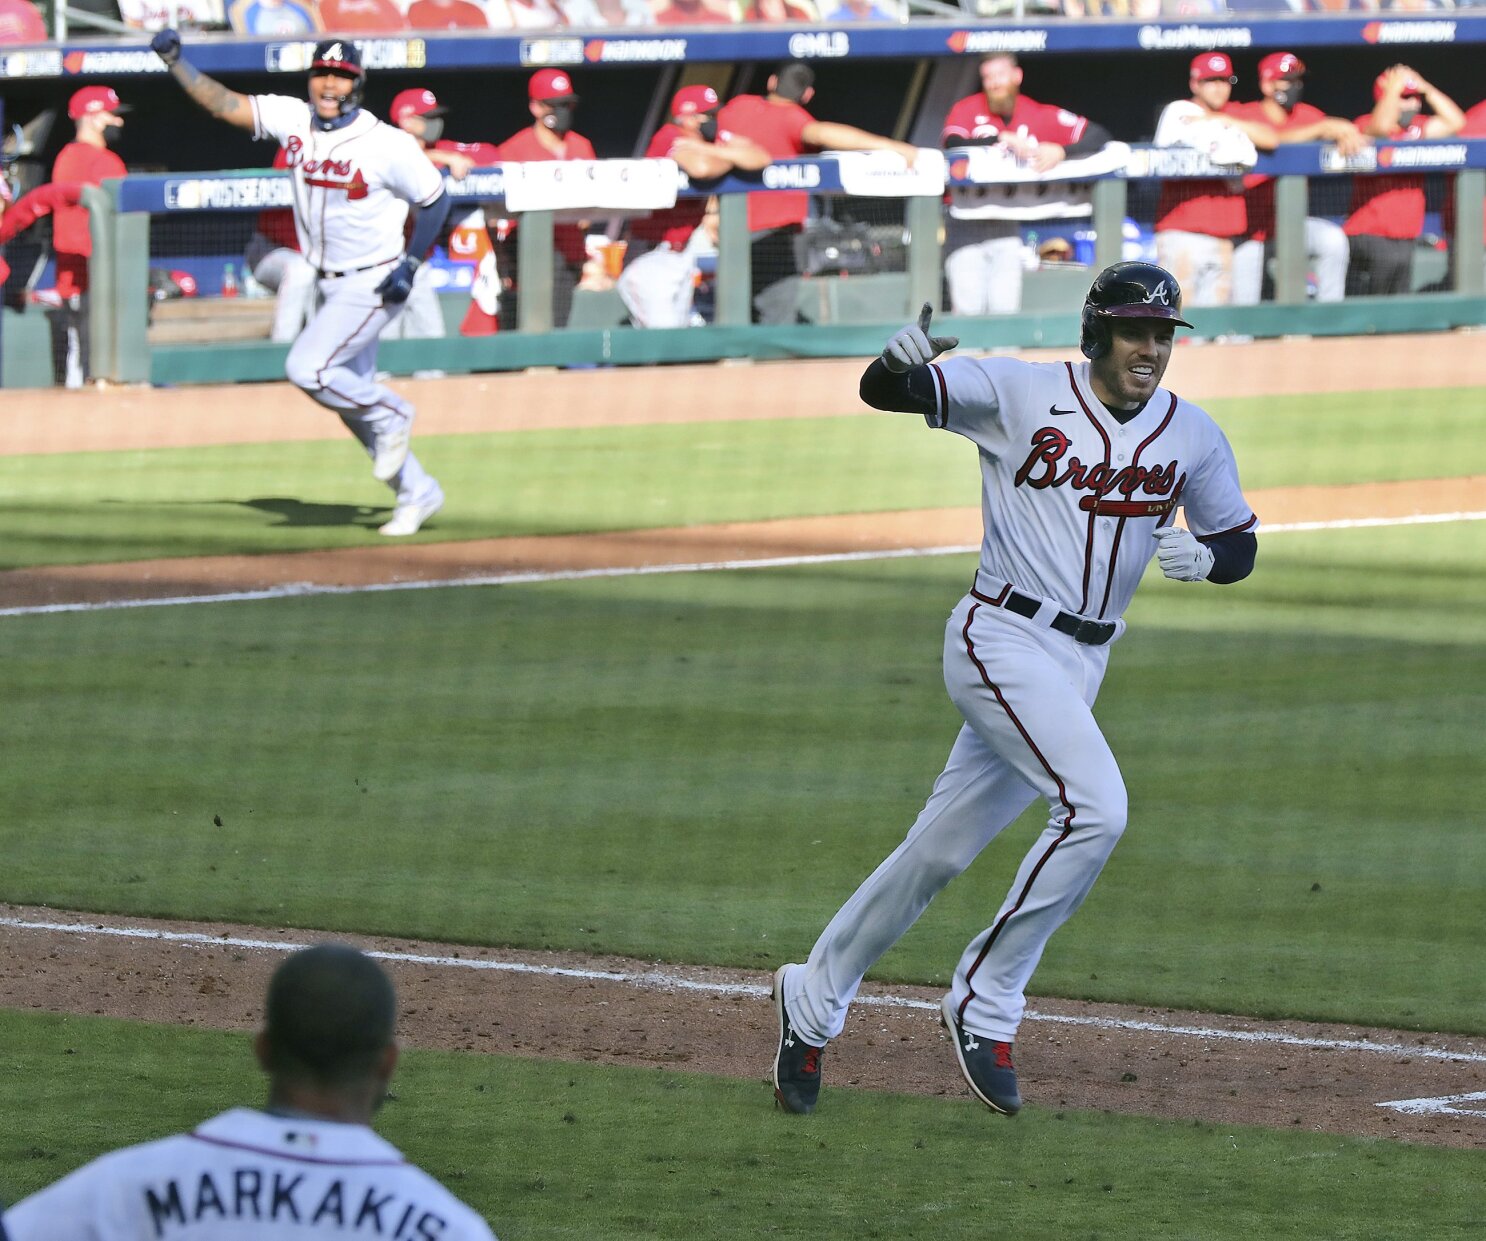 Freddie Freeman's RBI in 10th gives Braves 1-0 win vs. Reds